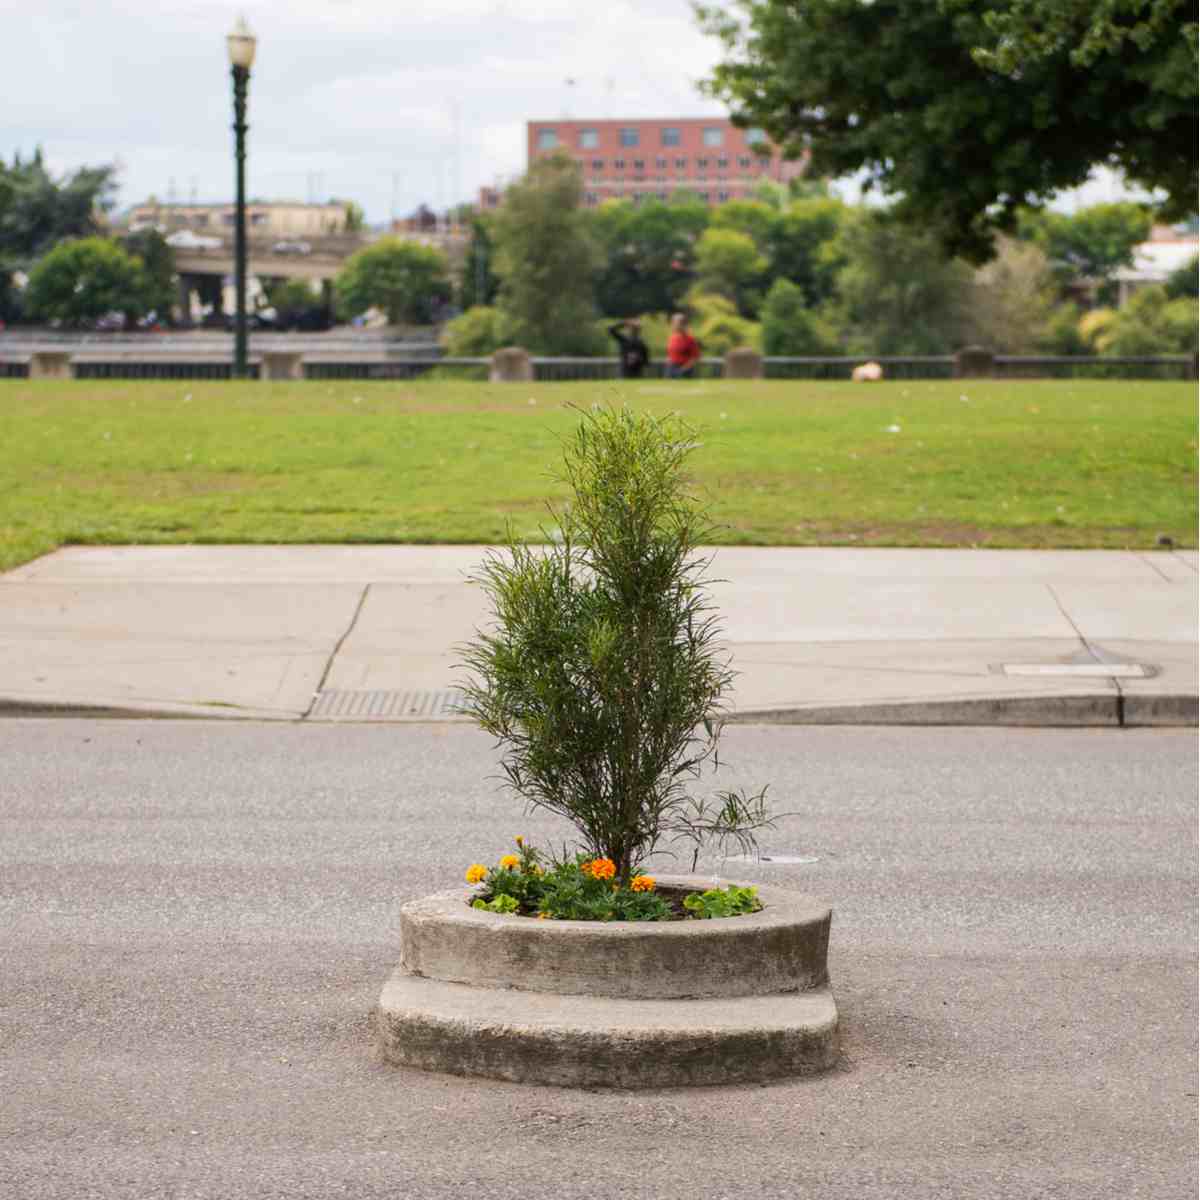 The smallest park in the world called Mills Ends Park, in Oregon, which measures 2 feet across.